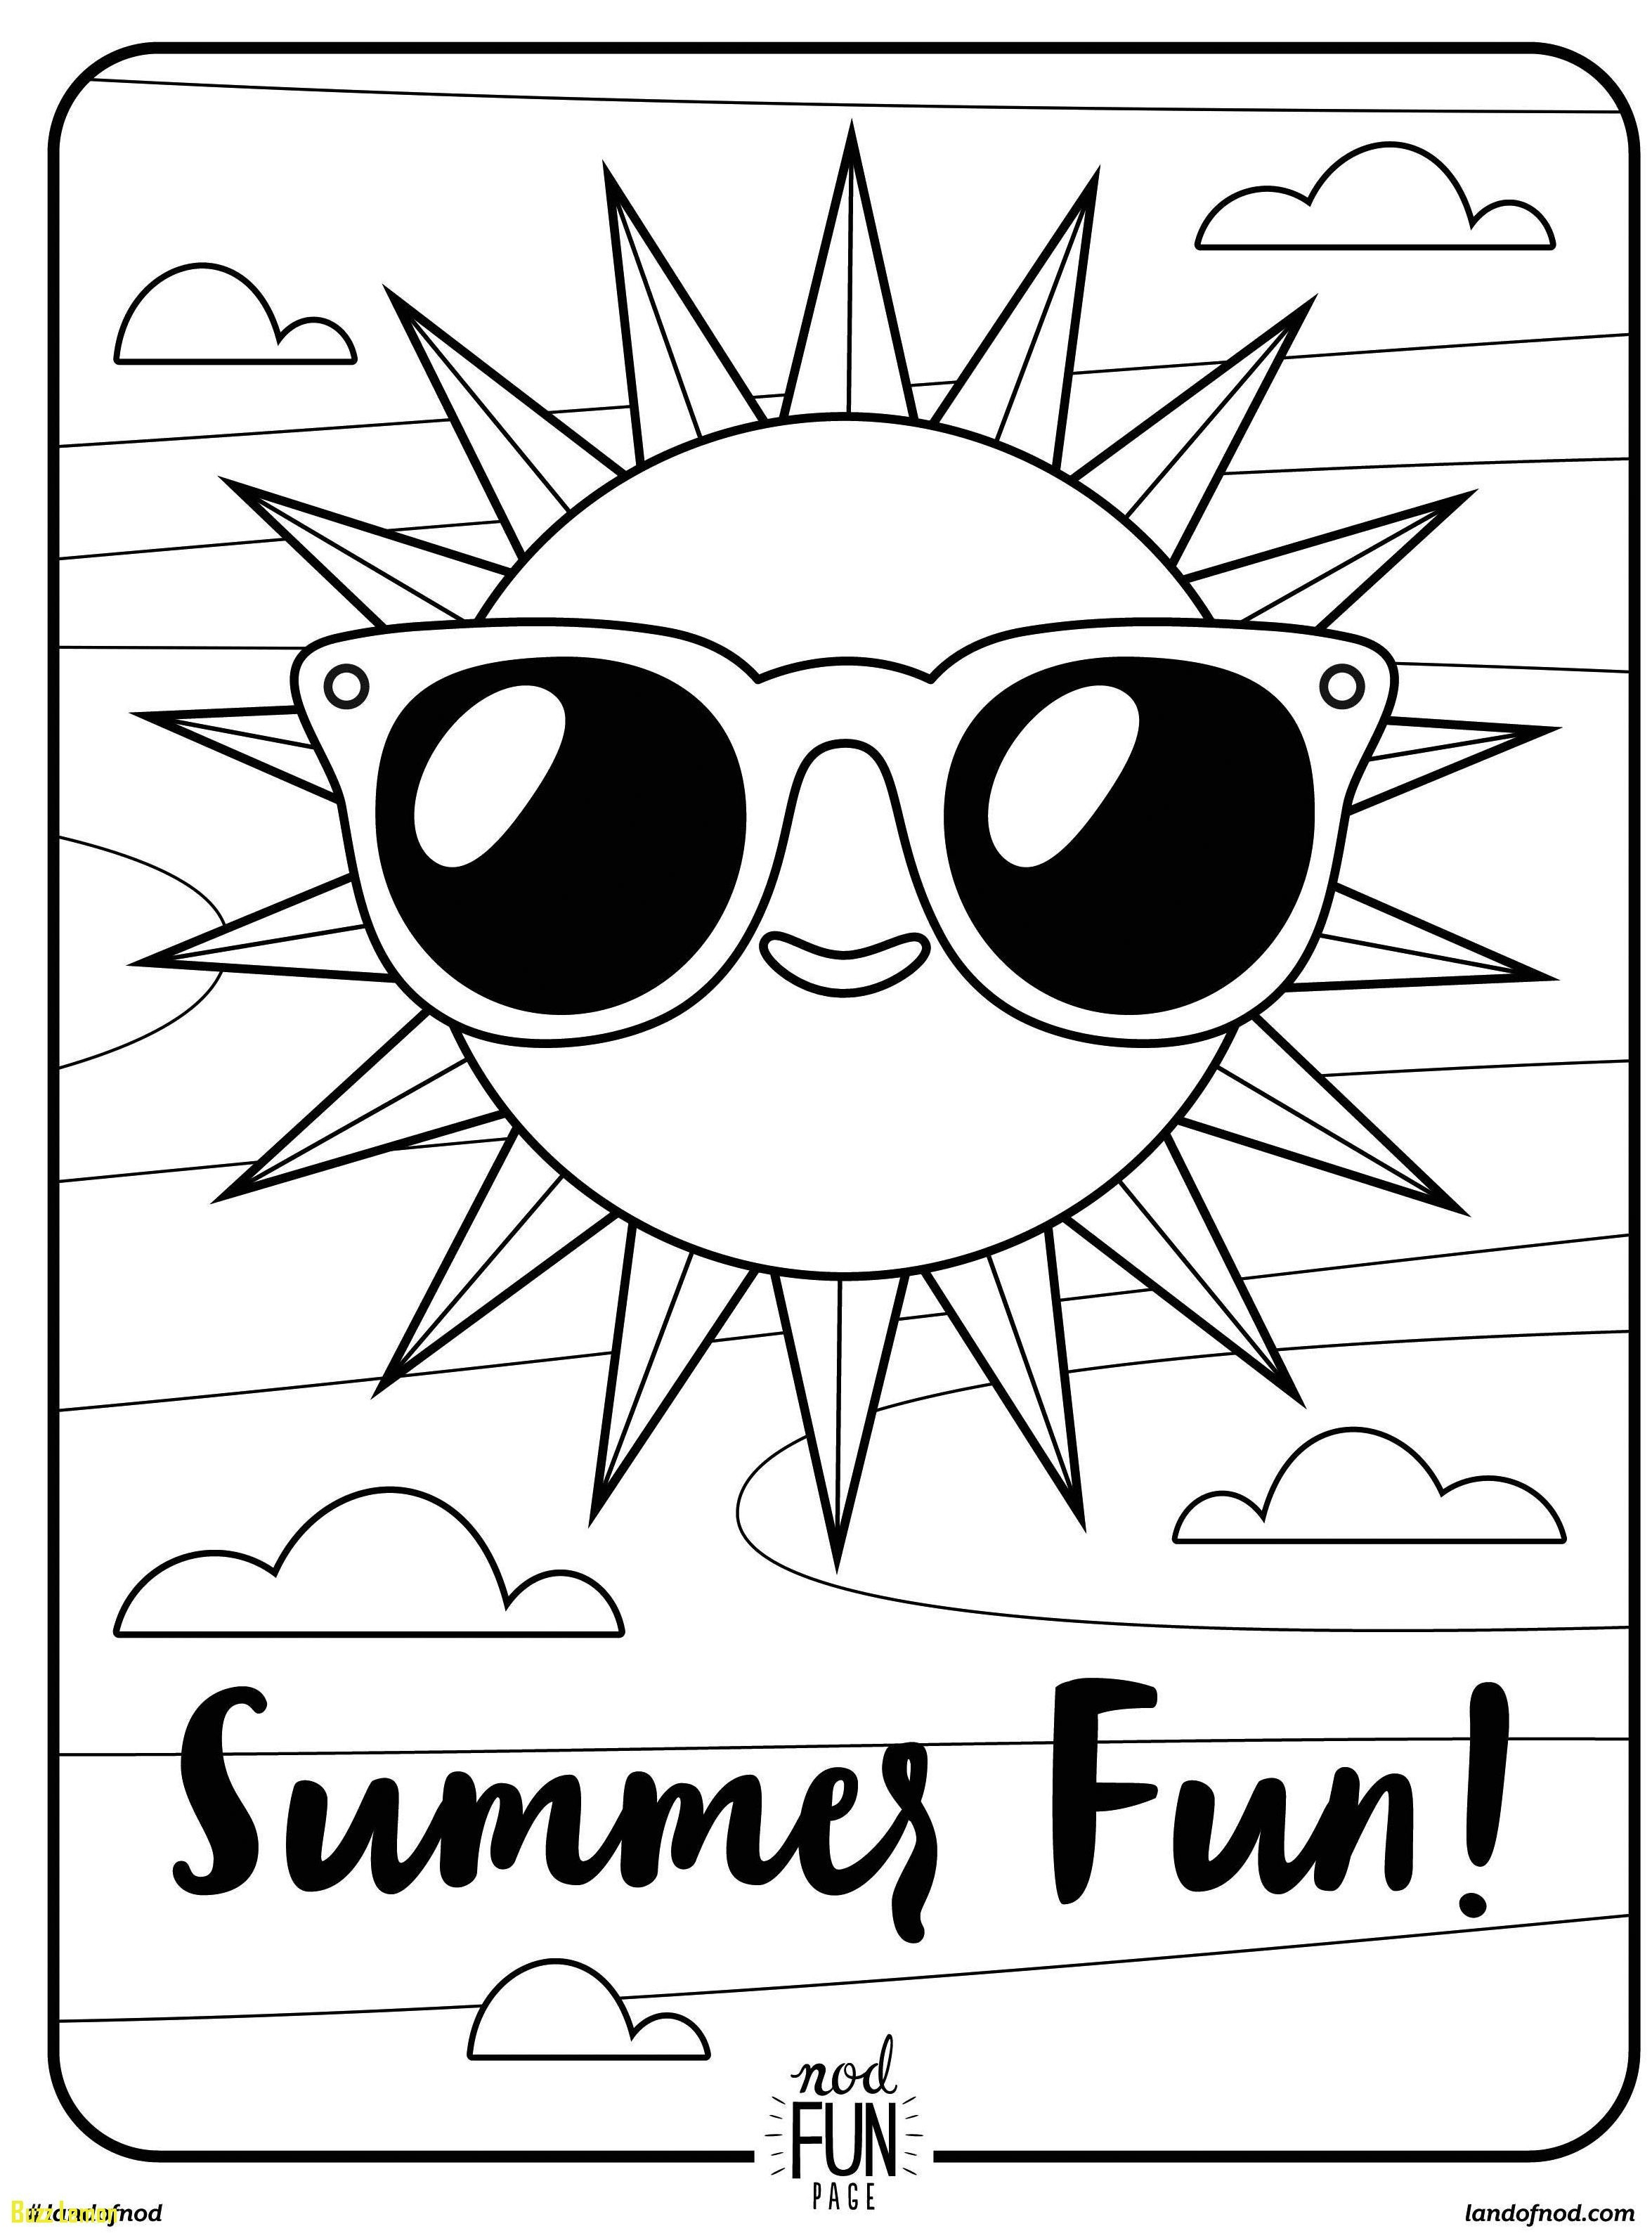 Coloring Ideas : 56 Outstanding Summer Coloring Pages To Print - Free Printable Summer Coloring Pages For Adults